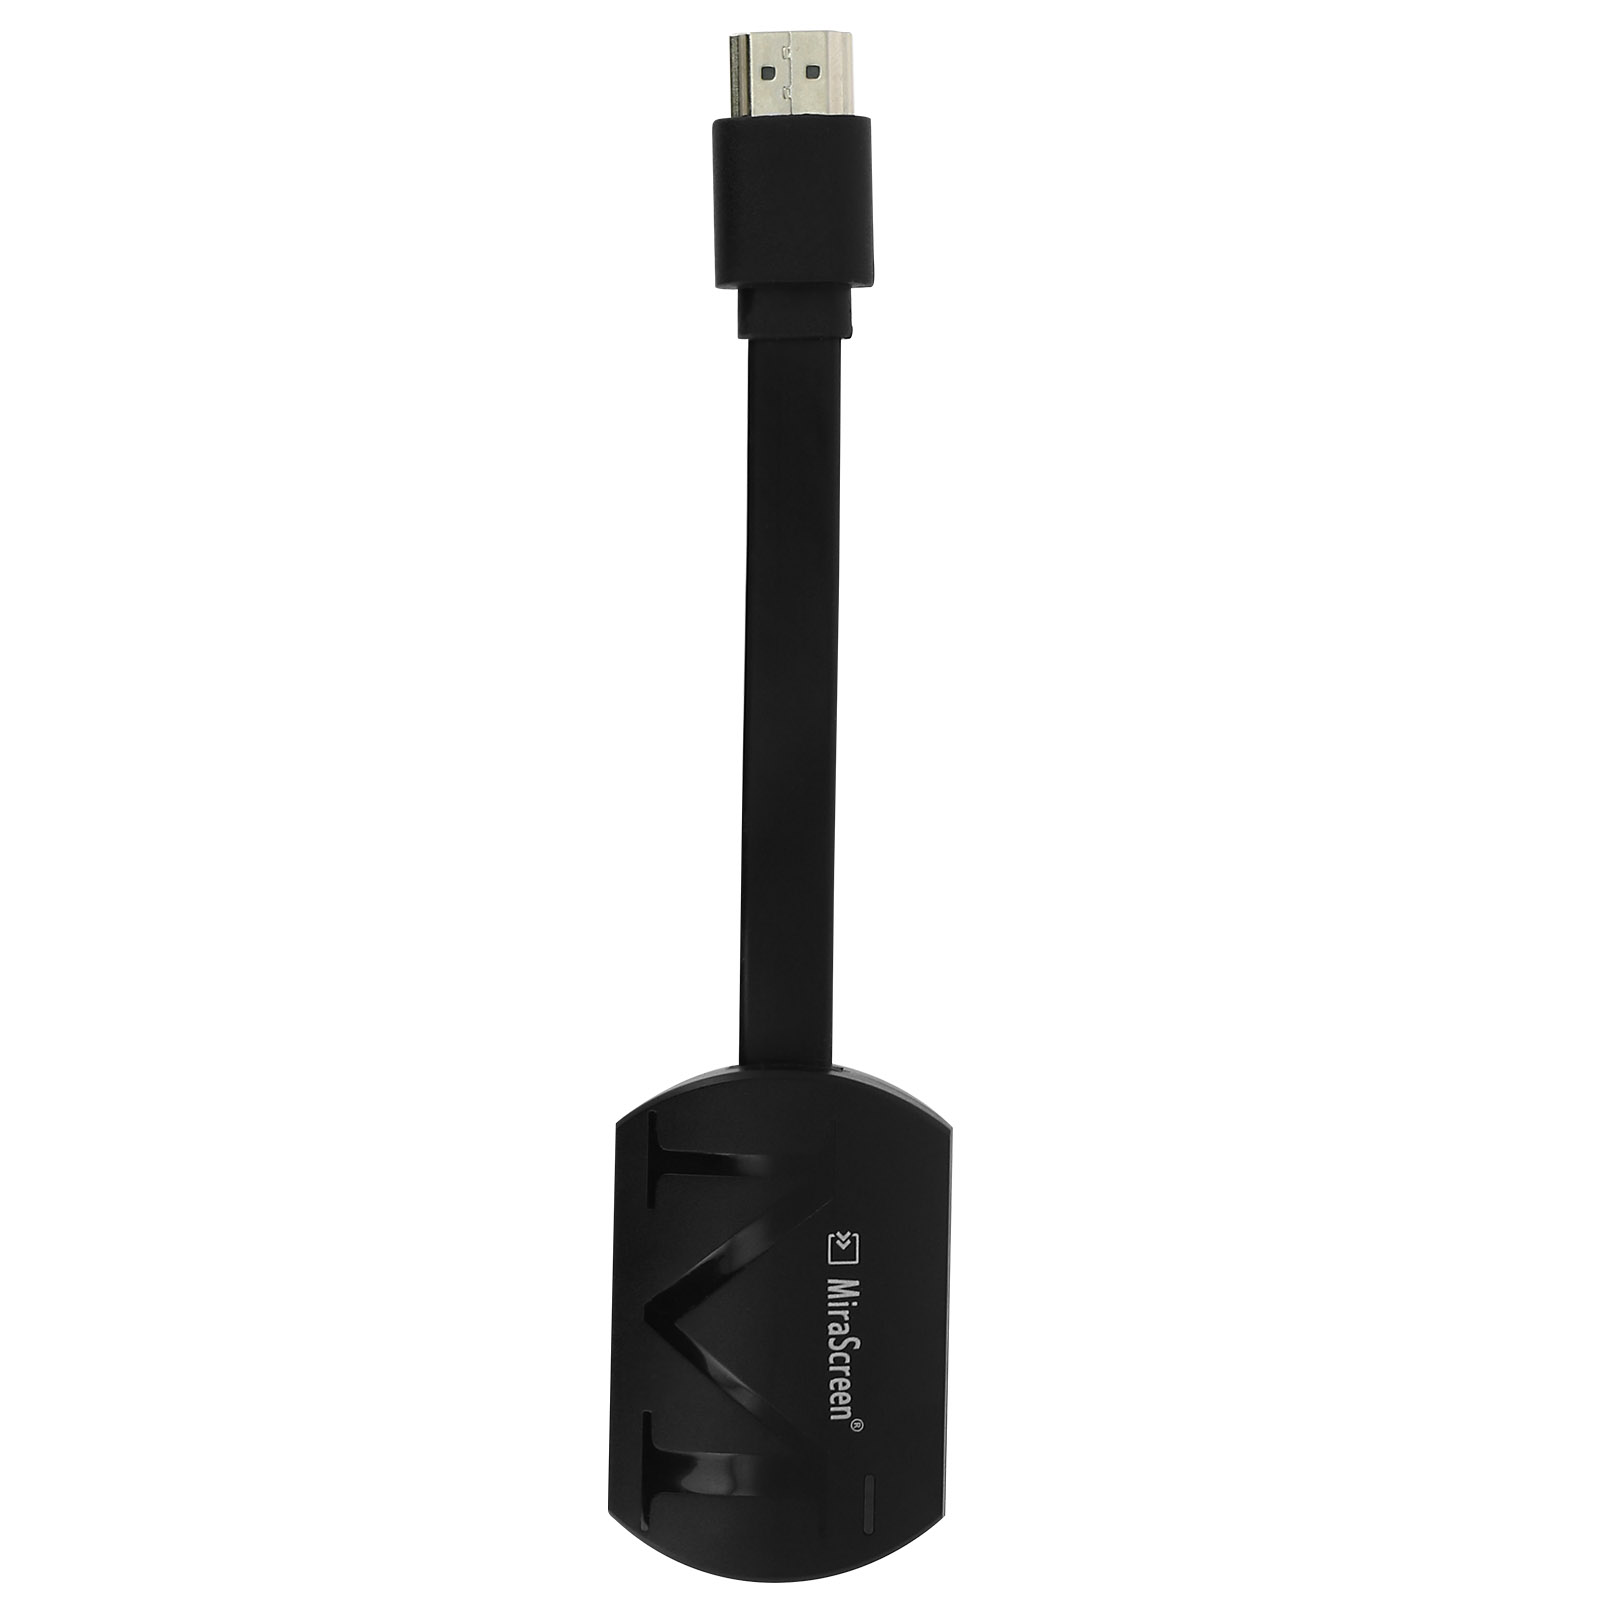 Dongle HDMI 1080p WiFi Inalámbrico TV Monitor Proyector (compatible con  Miracast, AirPlay, DLNA) - Spain